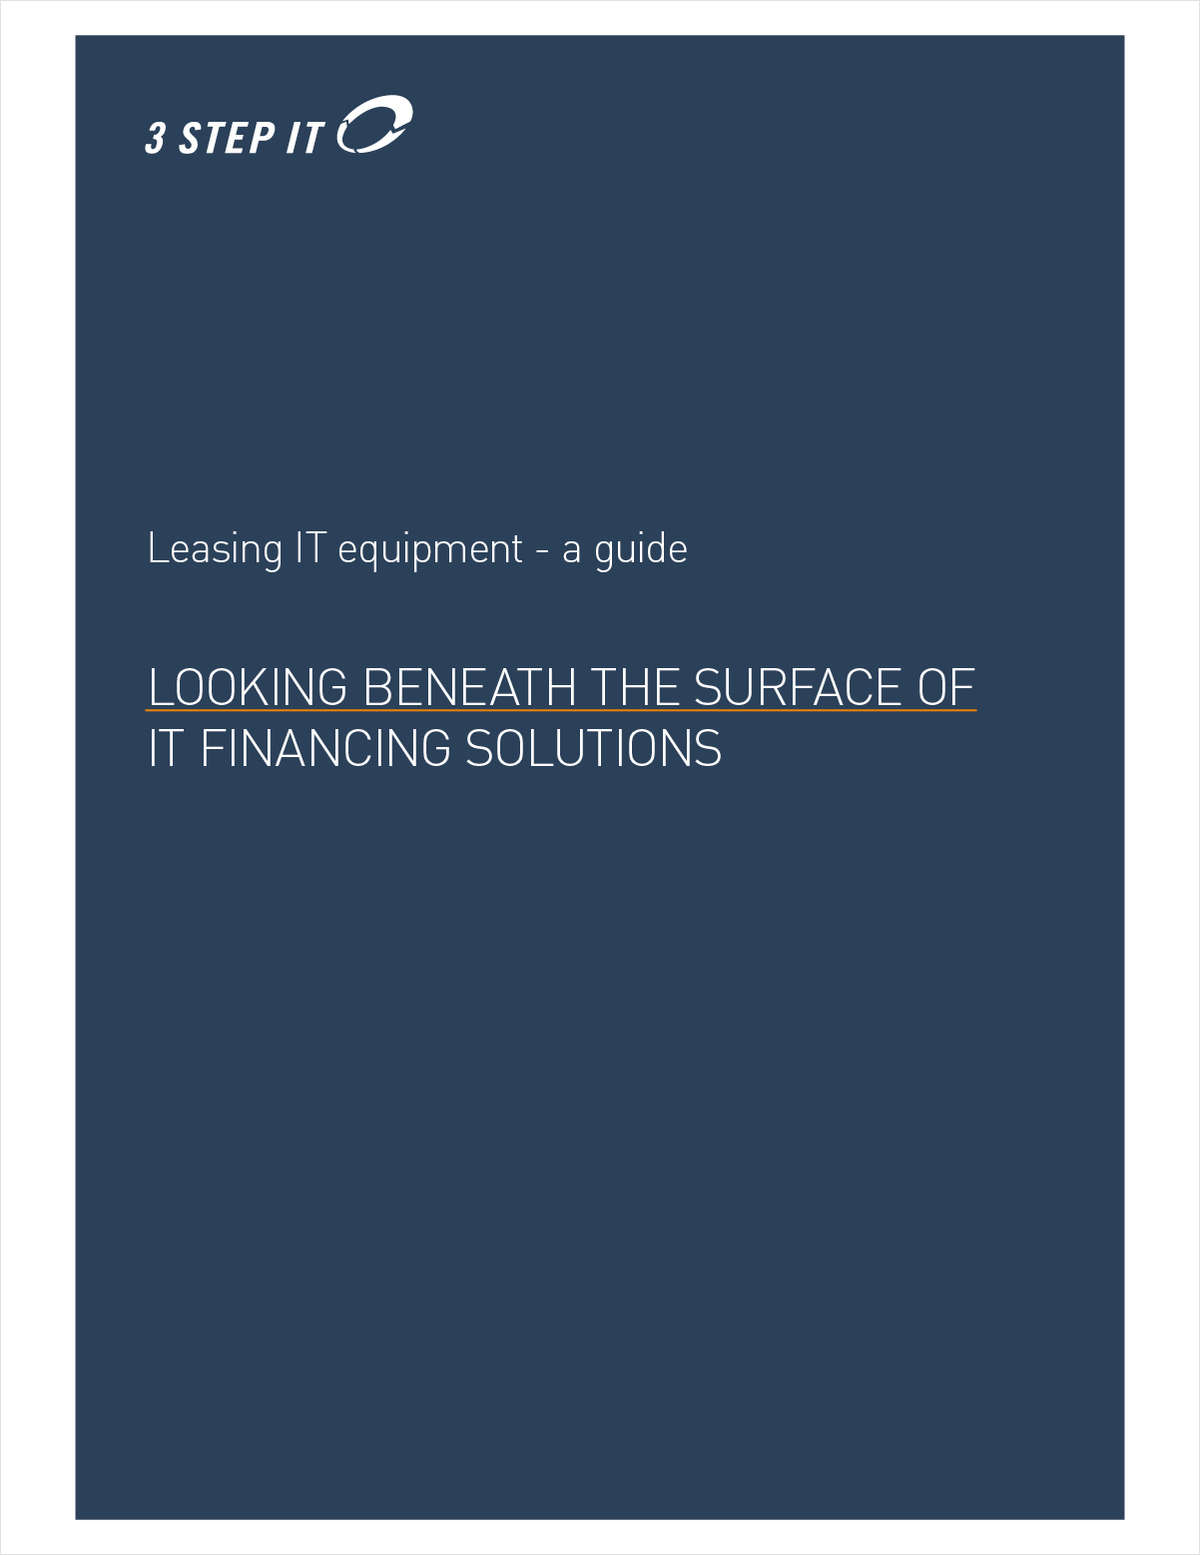 A Guide to Leasing IT Equipment - Looking Beneath the Surface of IT Financing Solutions.